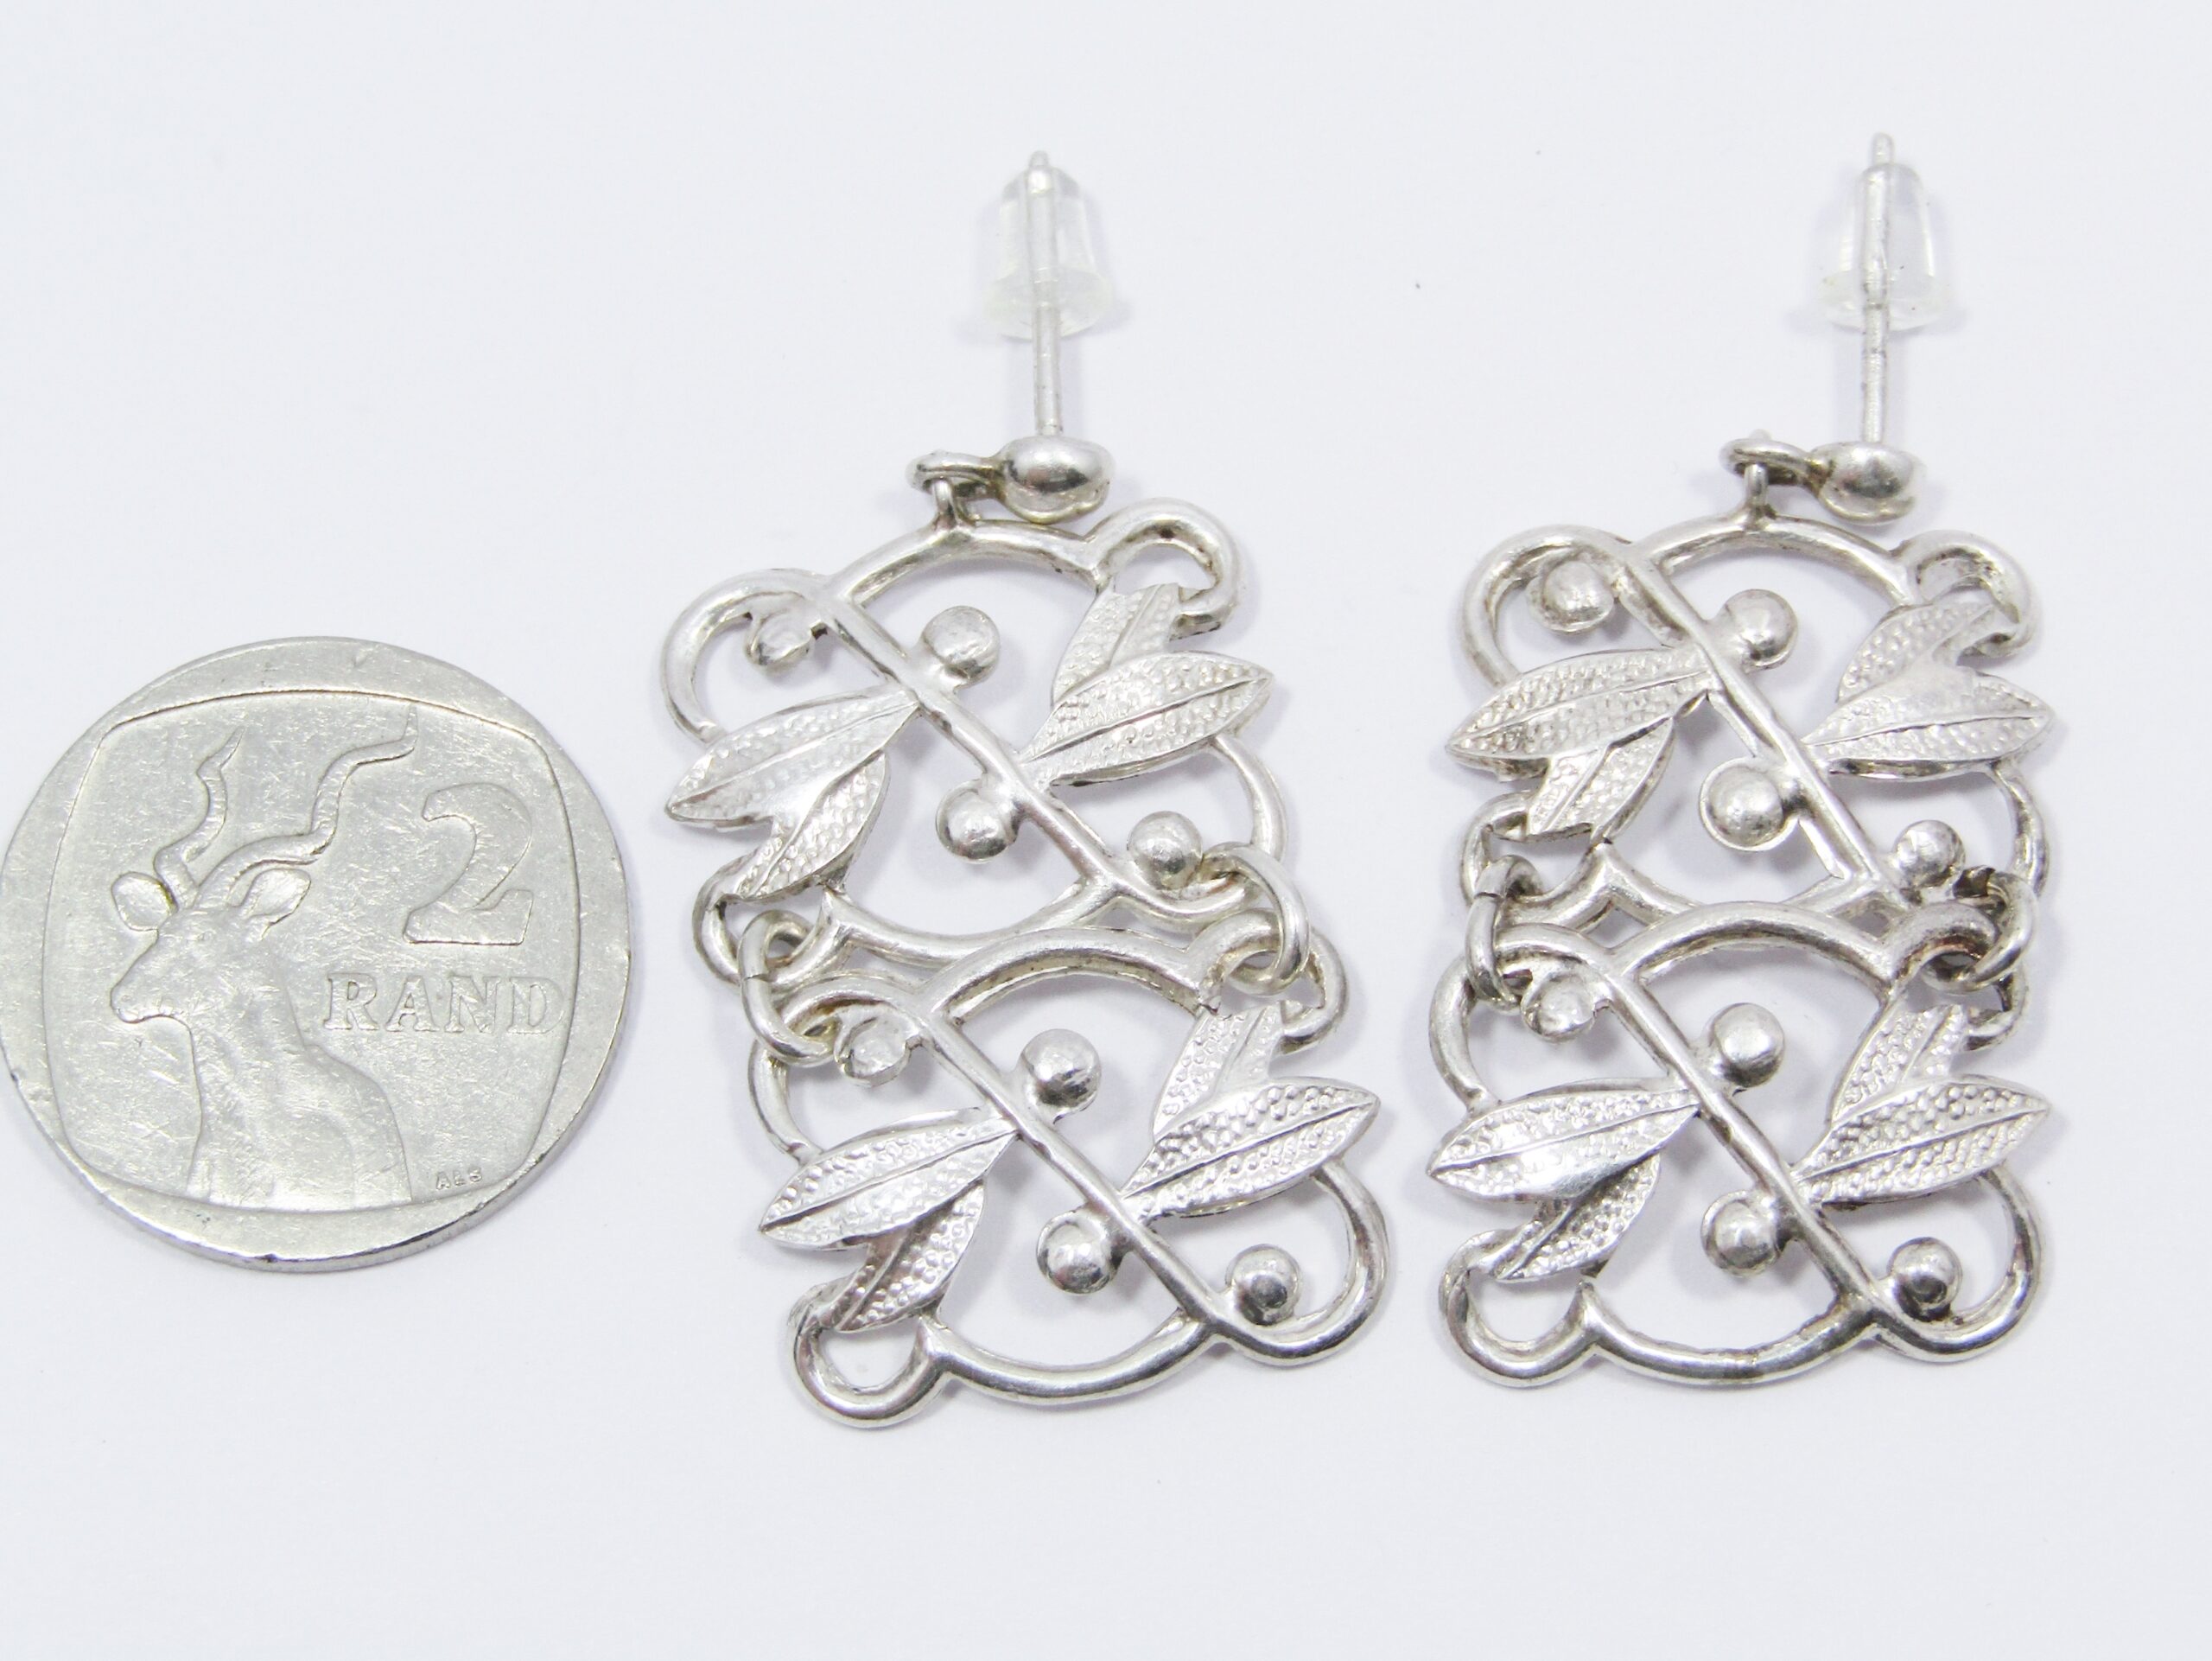 A Gorgeous Pair of Earrings in 800 Silver